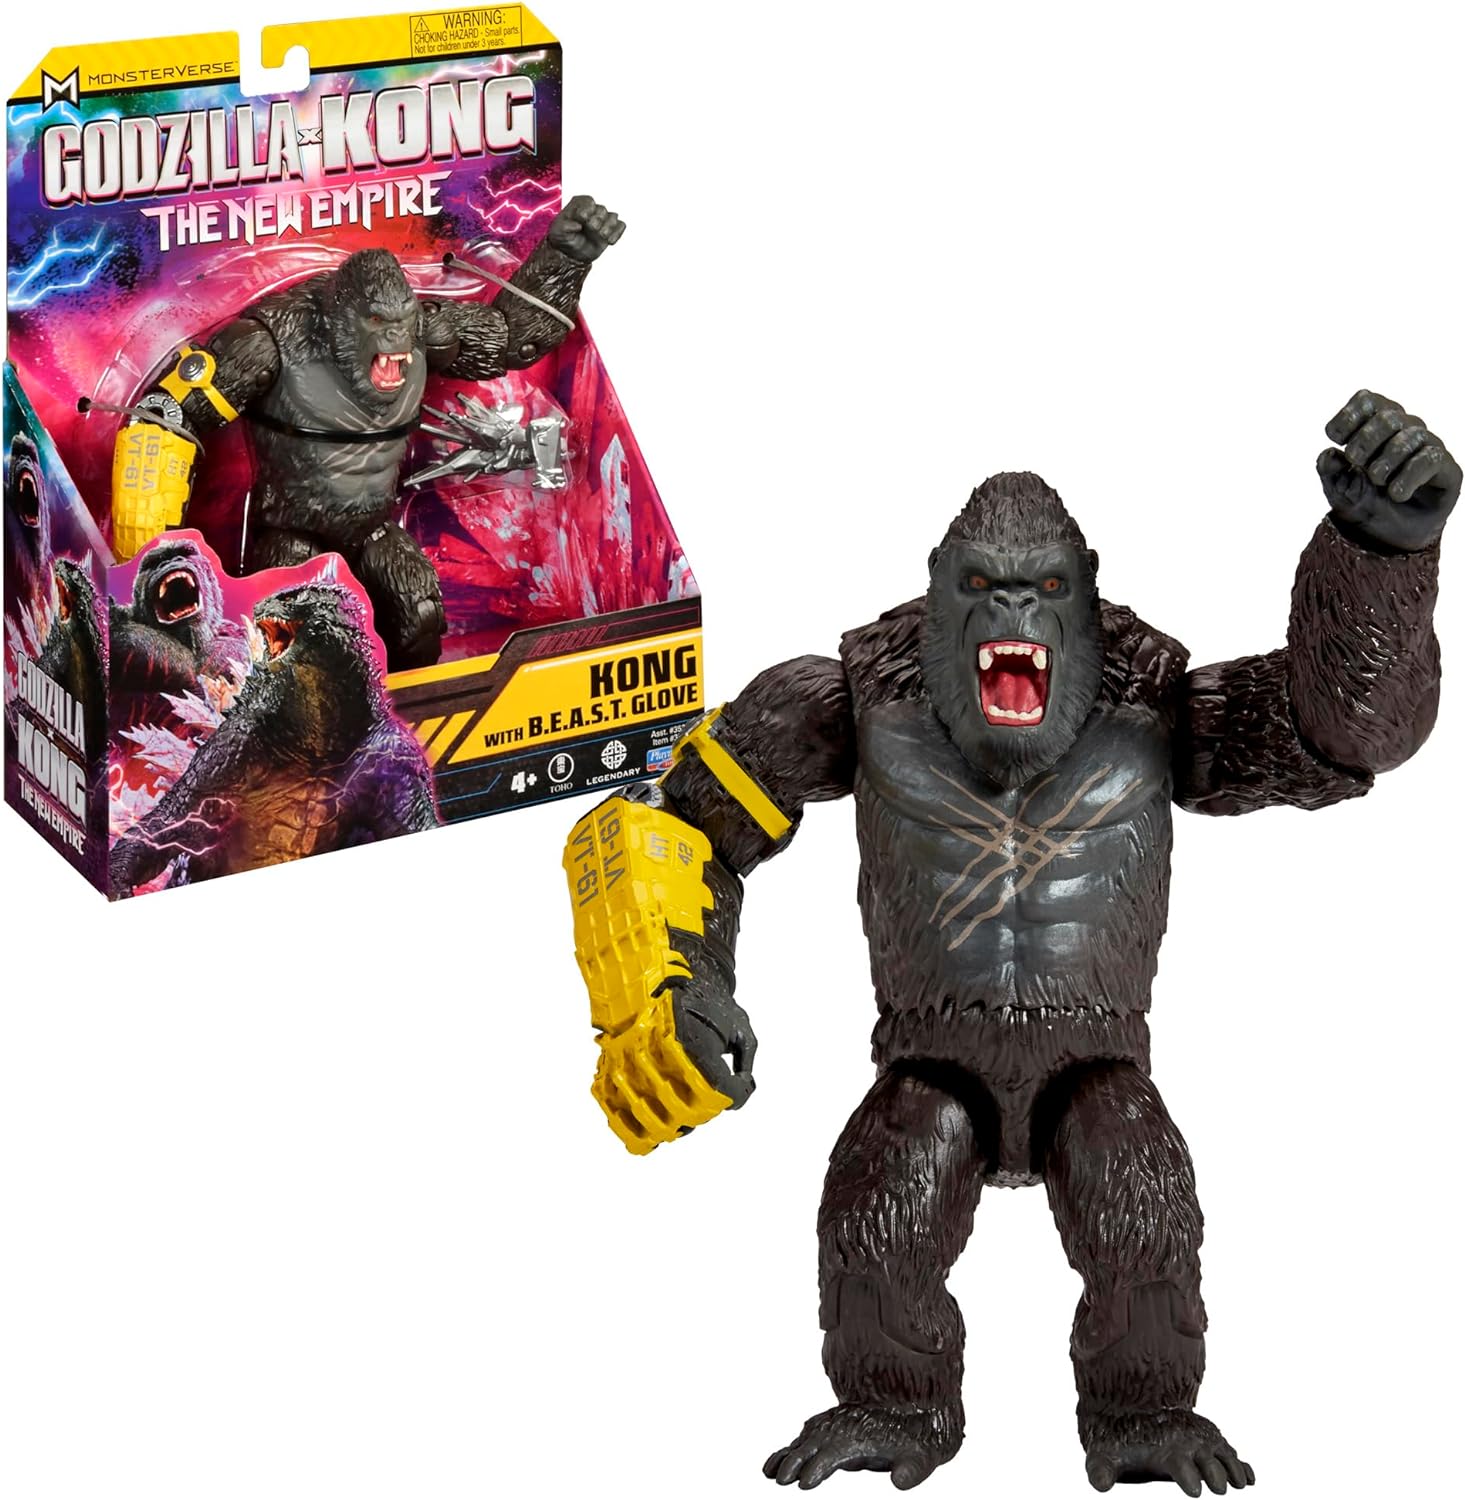 MonsterVerse Godzilla x Kong: The New Empire 6-Inch KONG WITH B.E.A.S.T GLOVE Action Figure